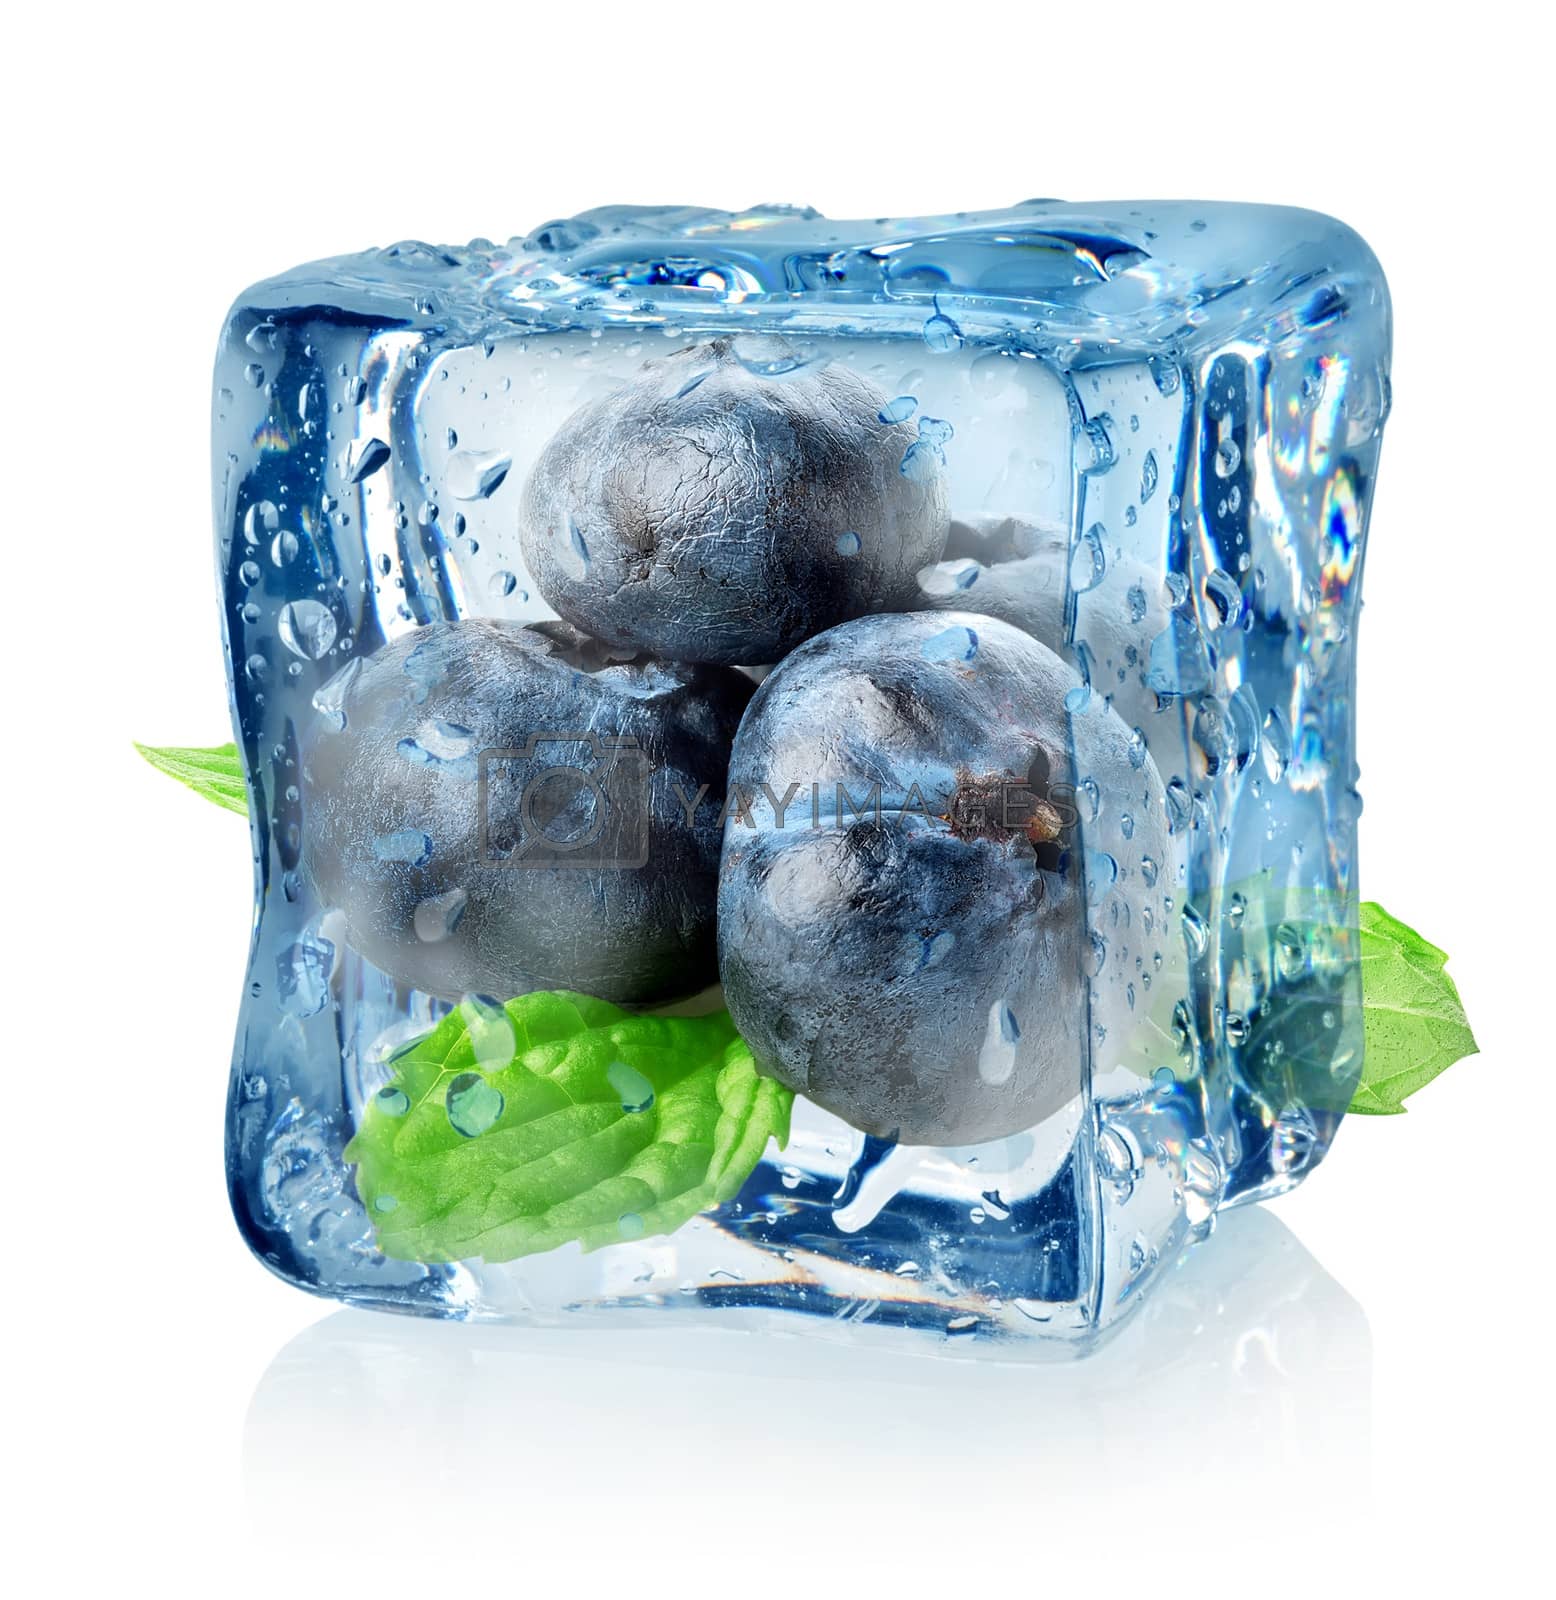 Royalty free image of Ice cube and blueberry by Givaga